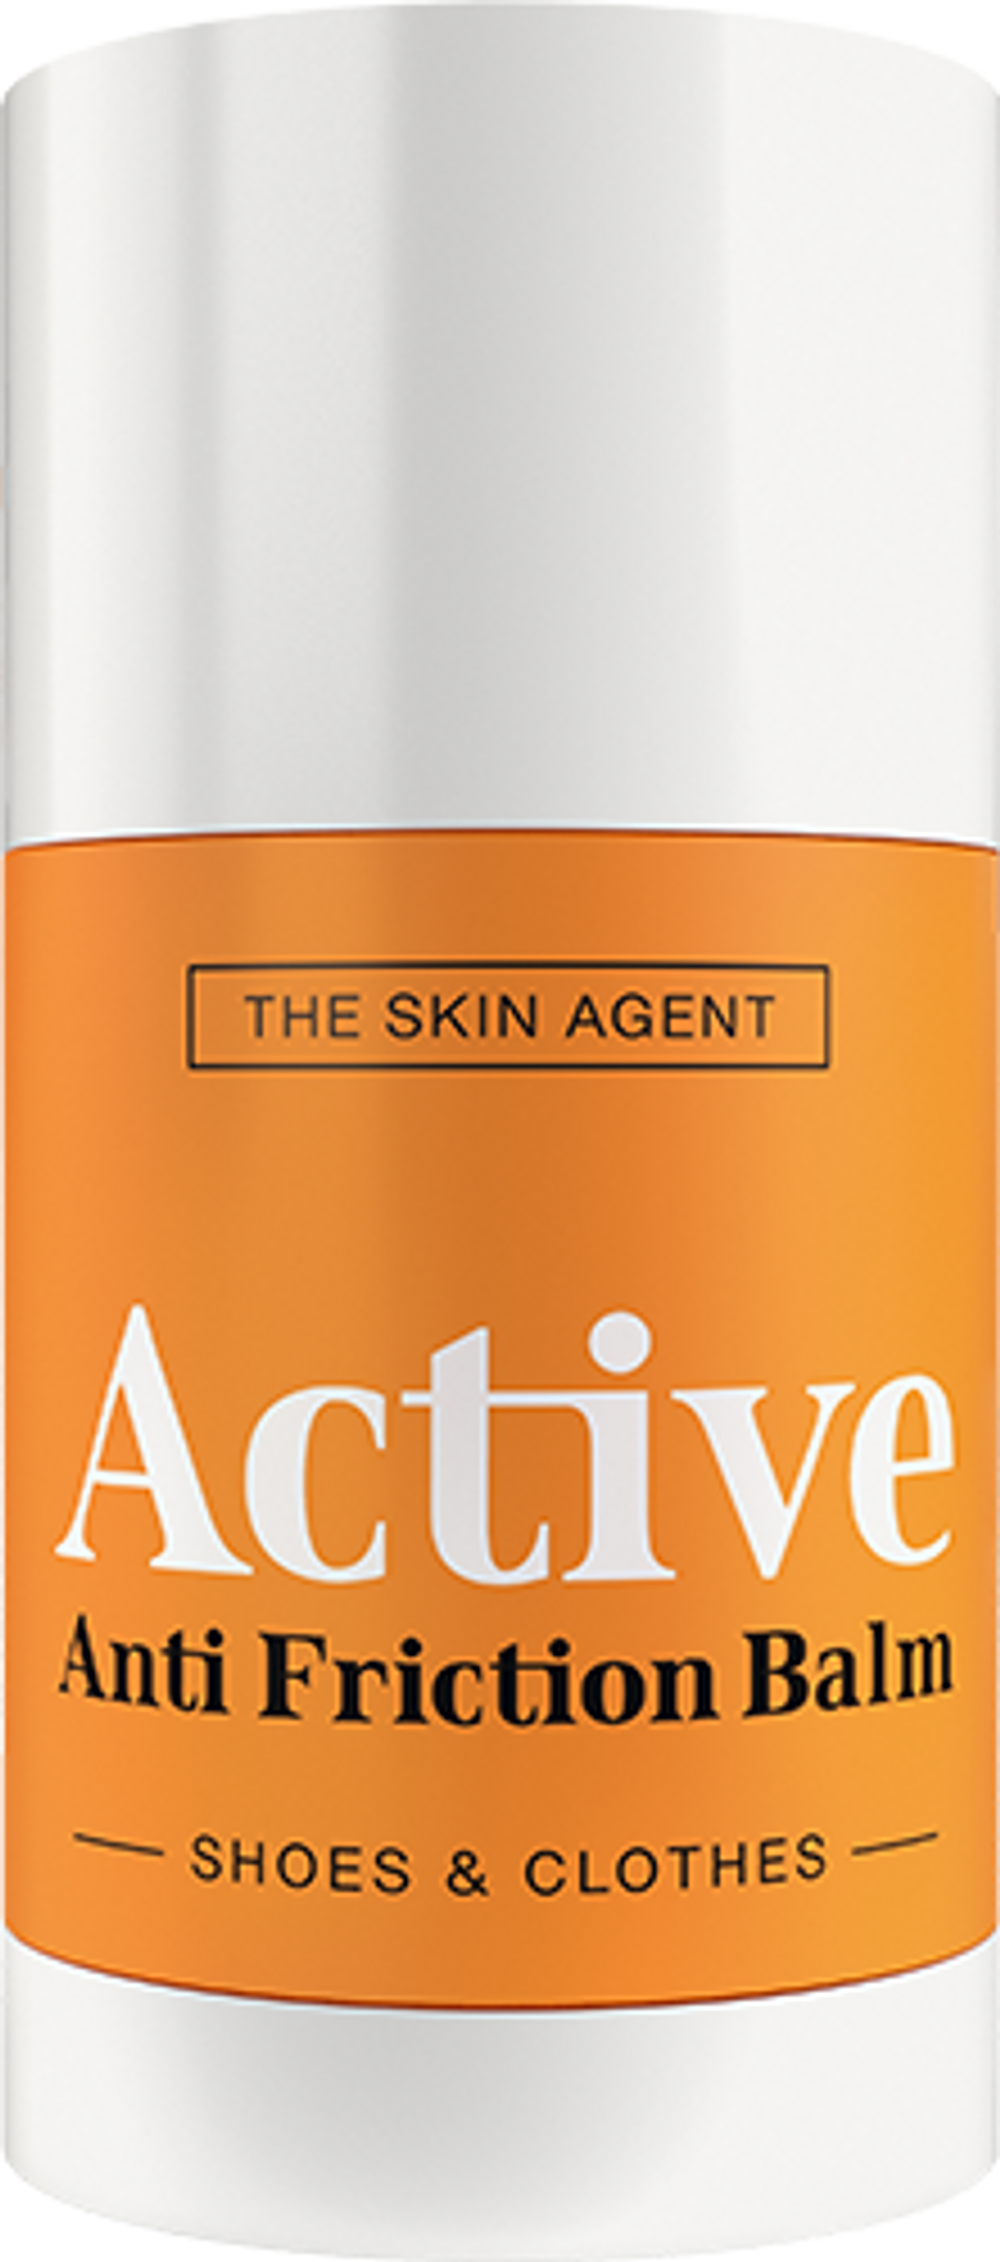 Active Anti Friction Balm 25 ml from The Skin Agent 
Isolated product image